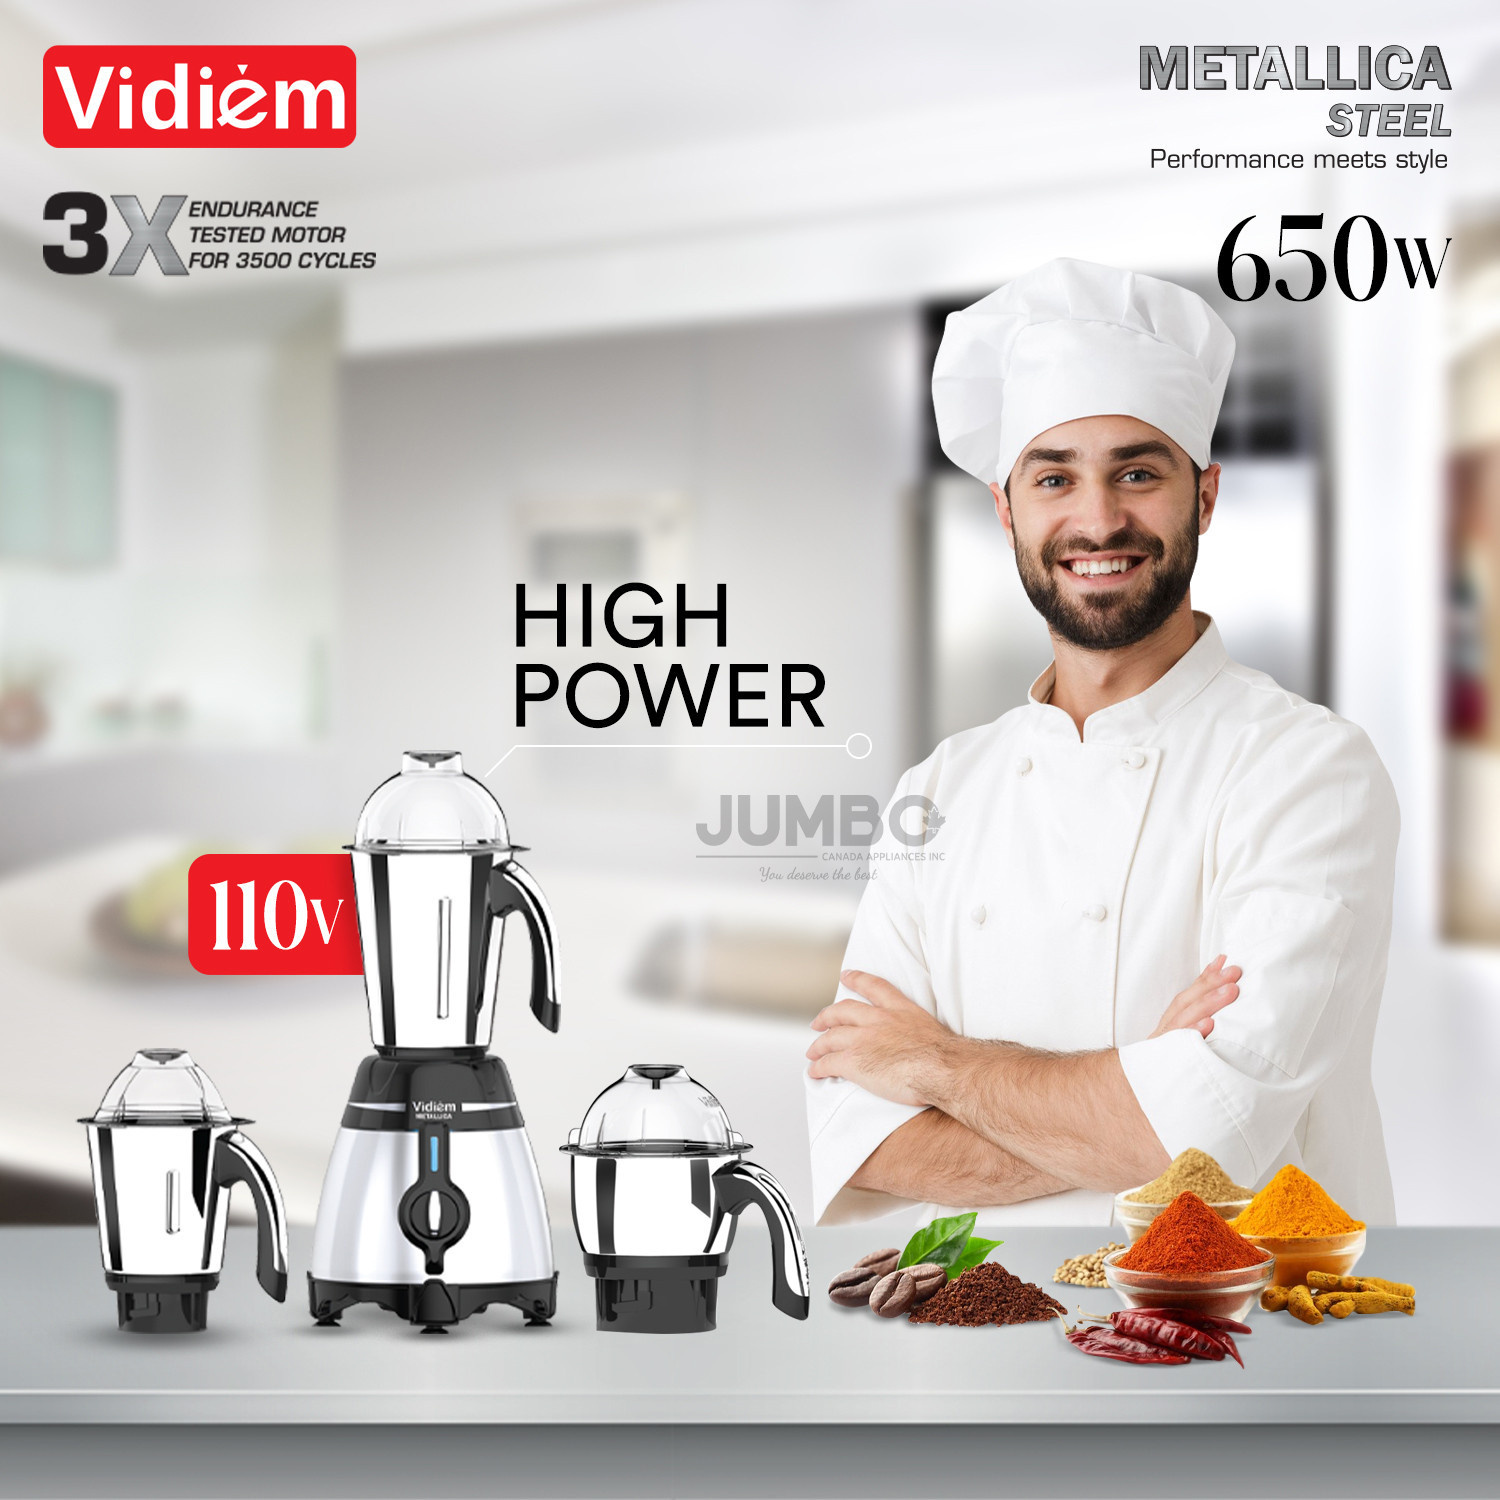 vidiem-metallica-steele-650w-110v-stainless-steel-jars-indian-mixer-grinder-with-spice-coffee-grinder-jar-for-use-in-canada-usa5